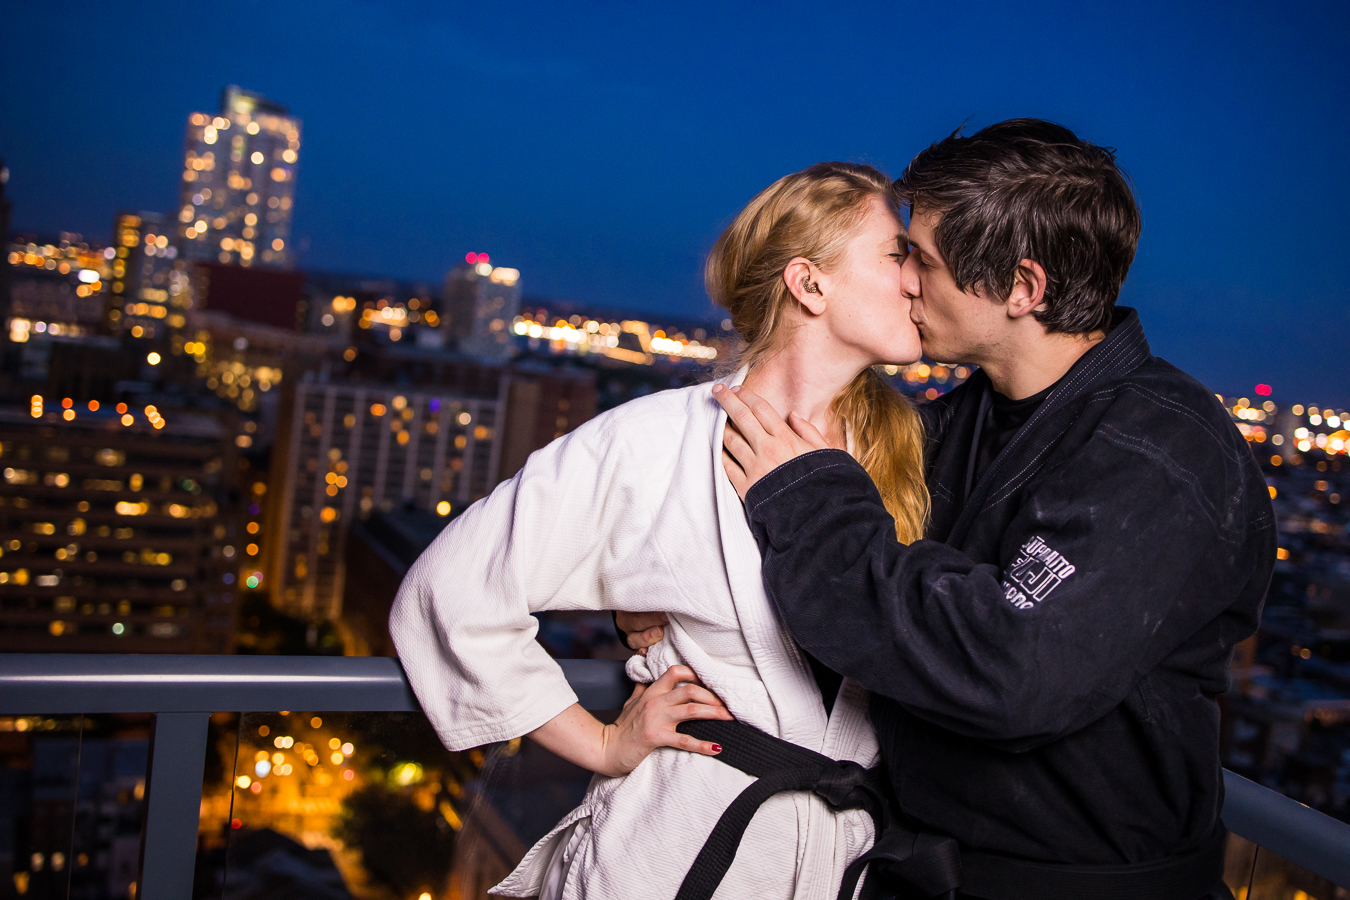 Creative Philadelphia Wedding Photographer, lisa rhinehart, captures this night time shot of the couple as they kiss on the rooftop of their apartment in their jiu-jitsu attire during their creative engagement session in center city Philadelphia 